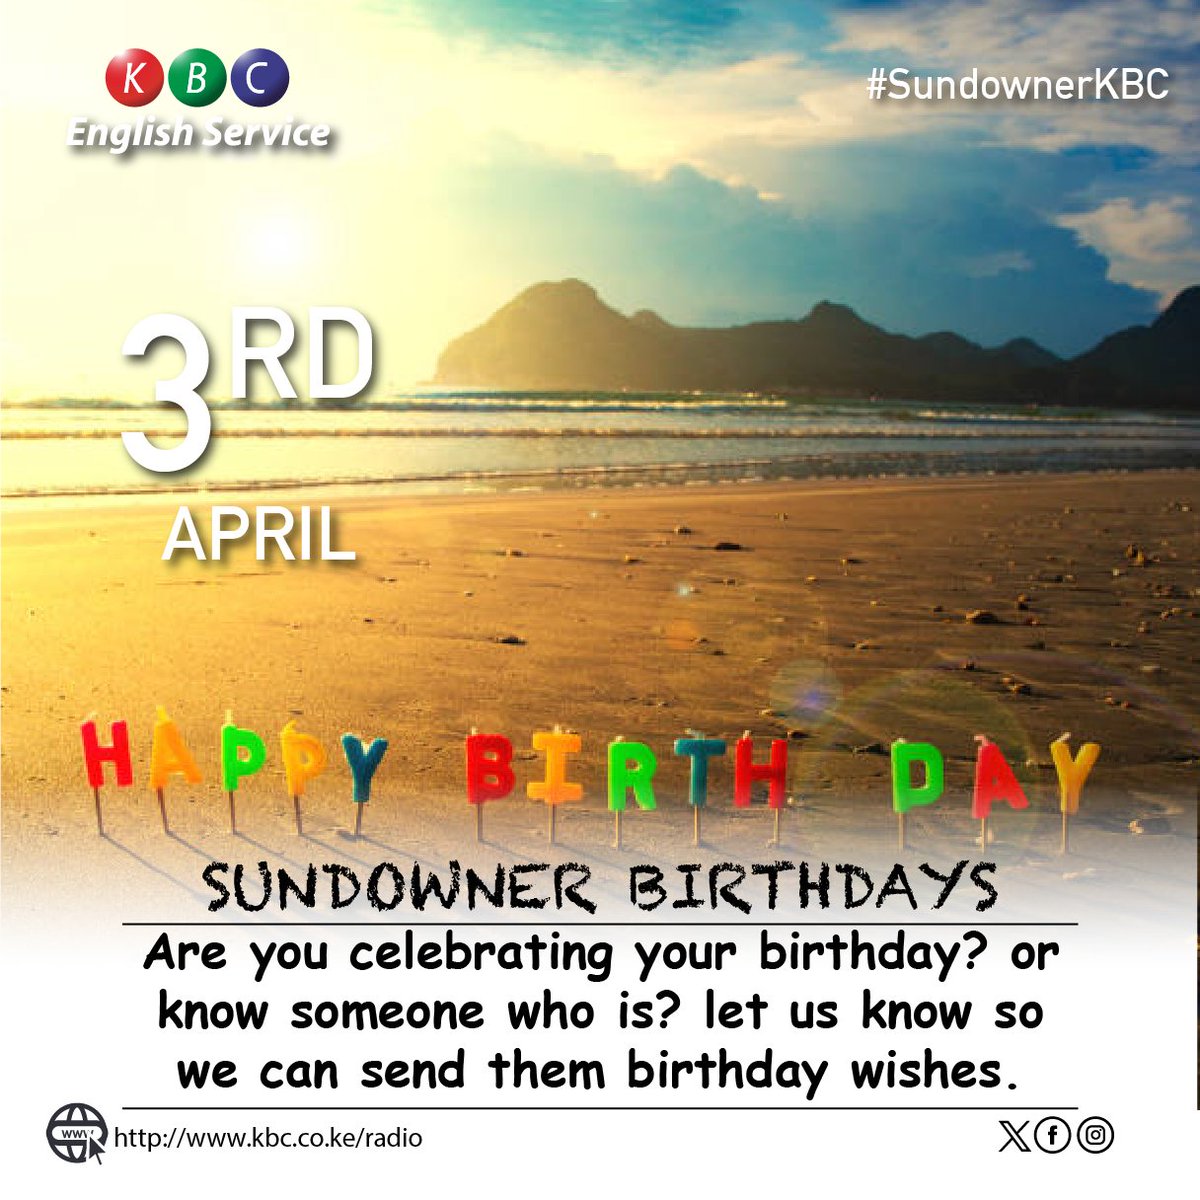 SUNDOWNER BIRTHDAYS Are you celebrating your birthday? or know someone who is? let us know so we can send them birthday wishes. ^PMN #SundownerKBC